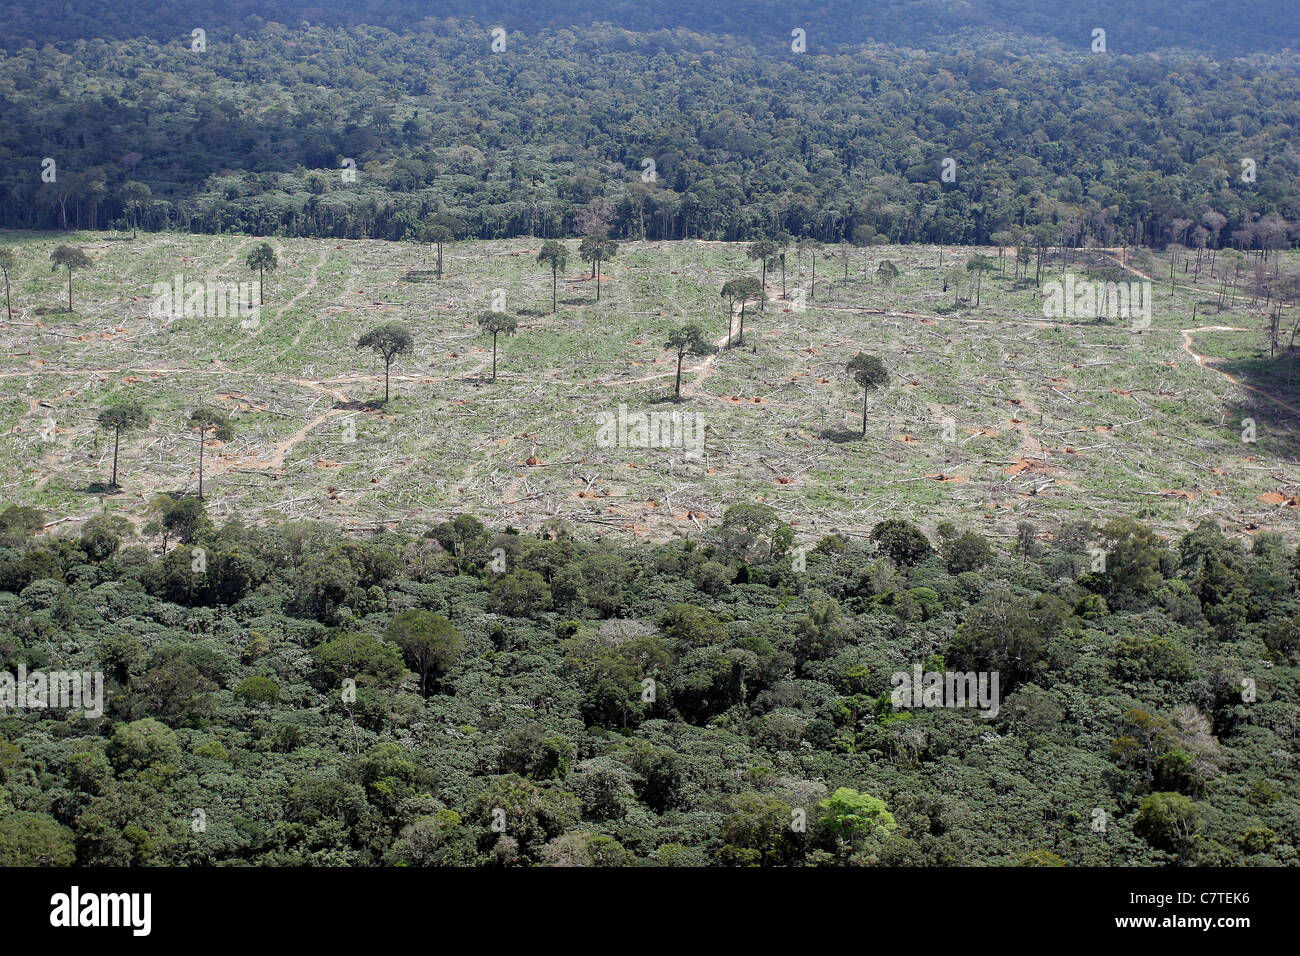 Aerial view Amazon rain forest clearance for agriculture Isolated Brazil nut trees sentenced to death Fallen trees Deforestation Stock Photo